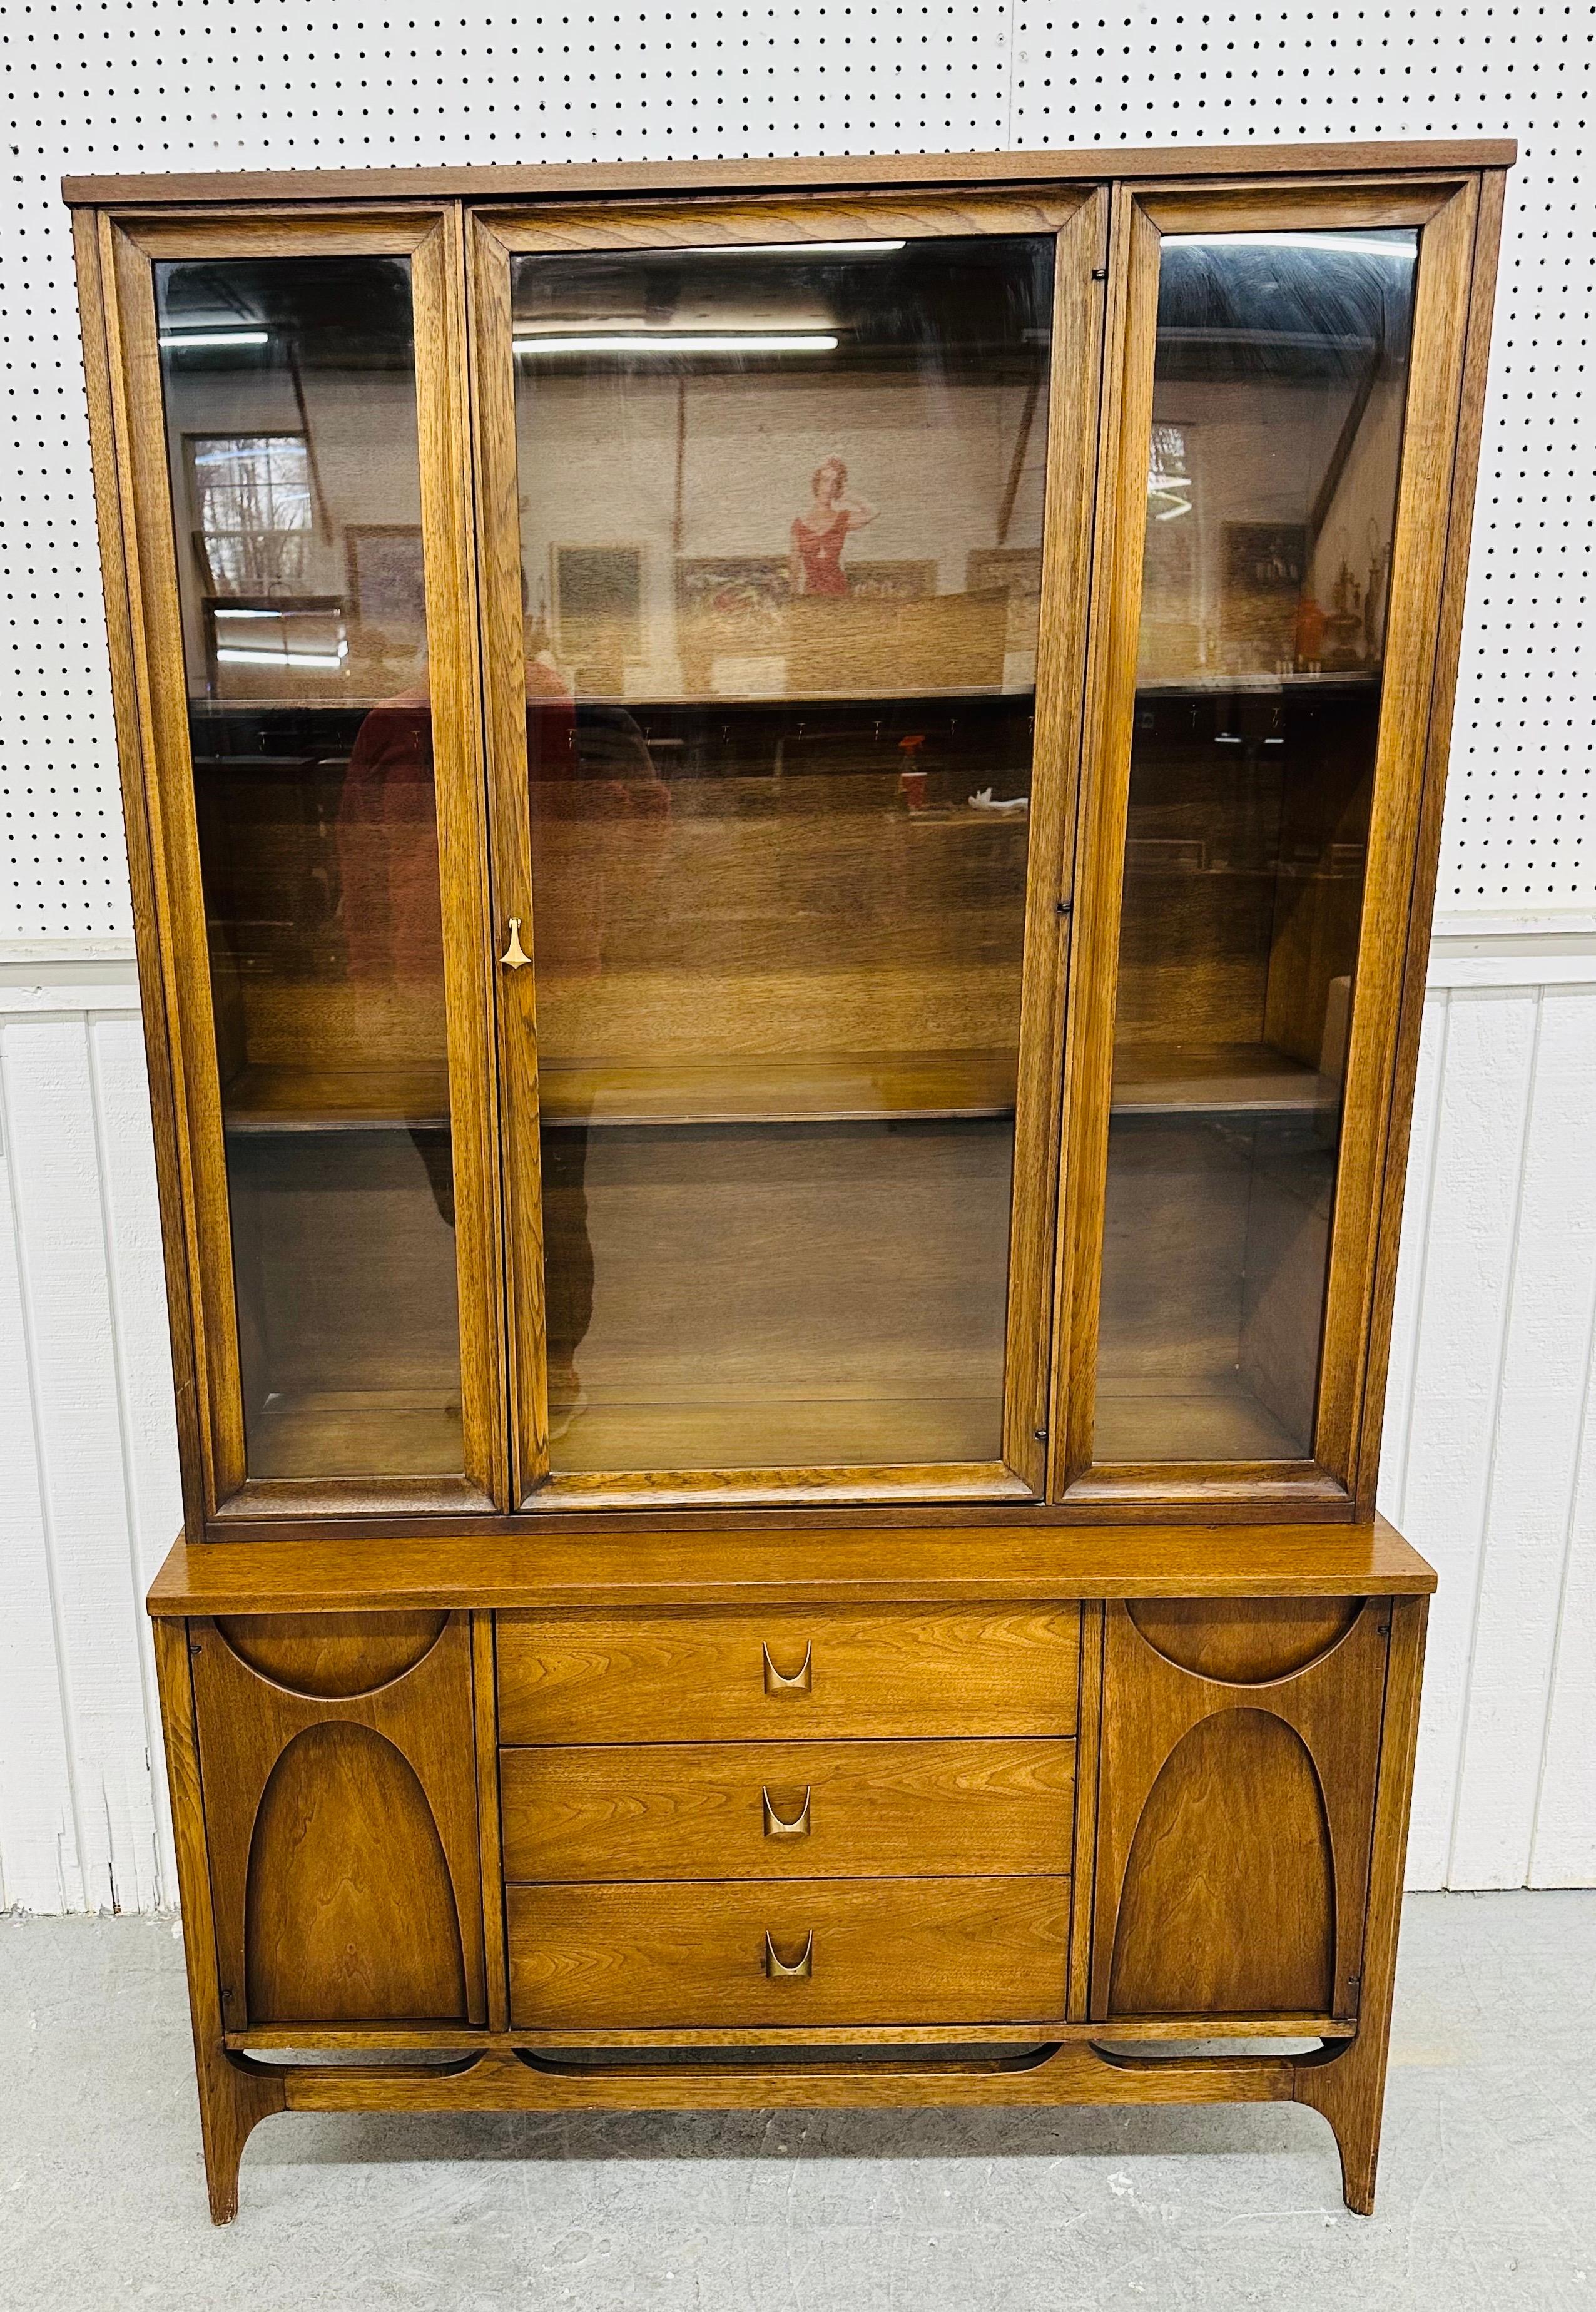 This listing is for a Mid-Century Modern Broyhill Brasilia Walnut Display Cabinet. Featuring a straight line design, a removable top with center door that opens up to two fixed shelves, bottom cabinet with two sculpted doors that open up to storage